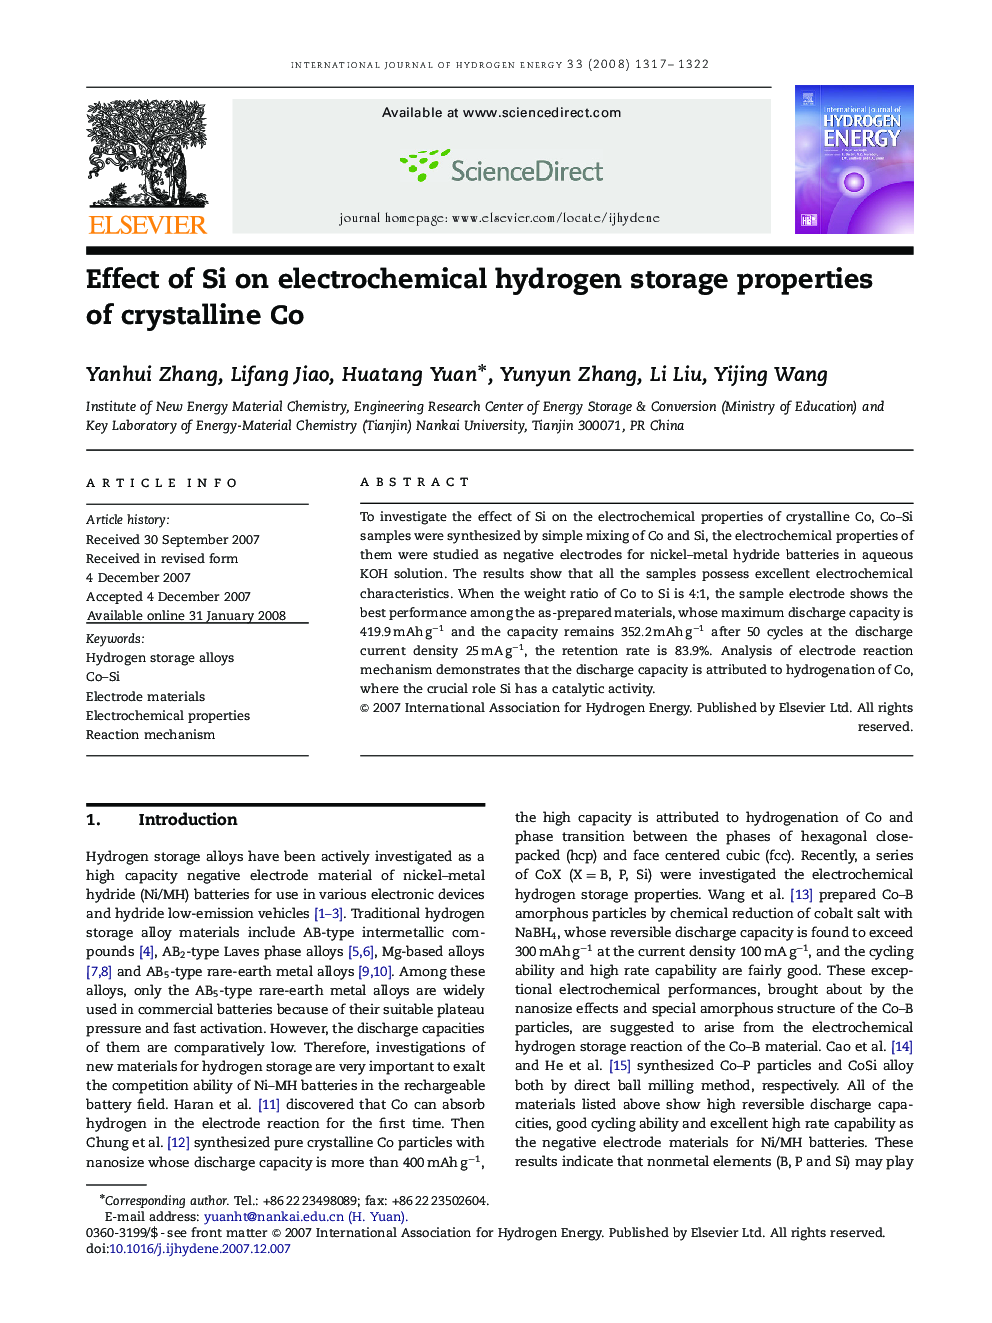 Effect of Si on electrochemical hydrogen storage properties of crystalline Co